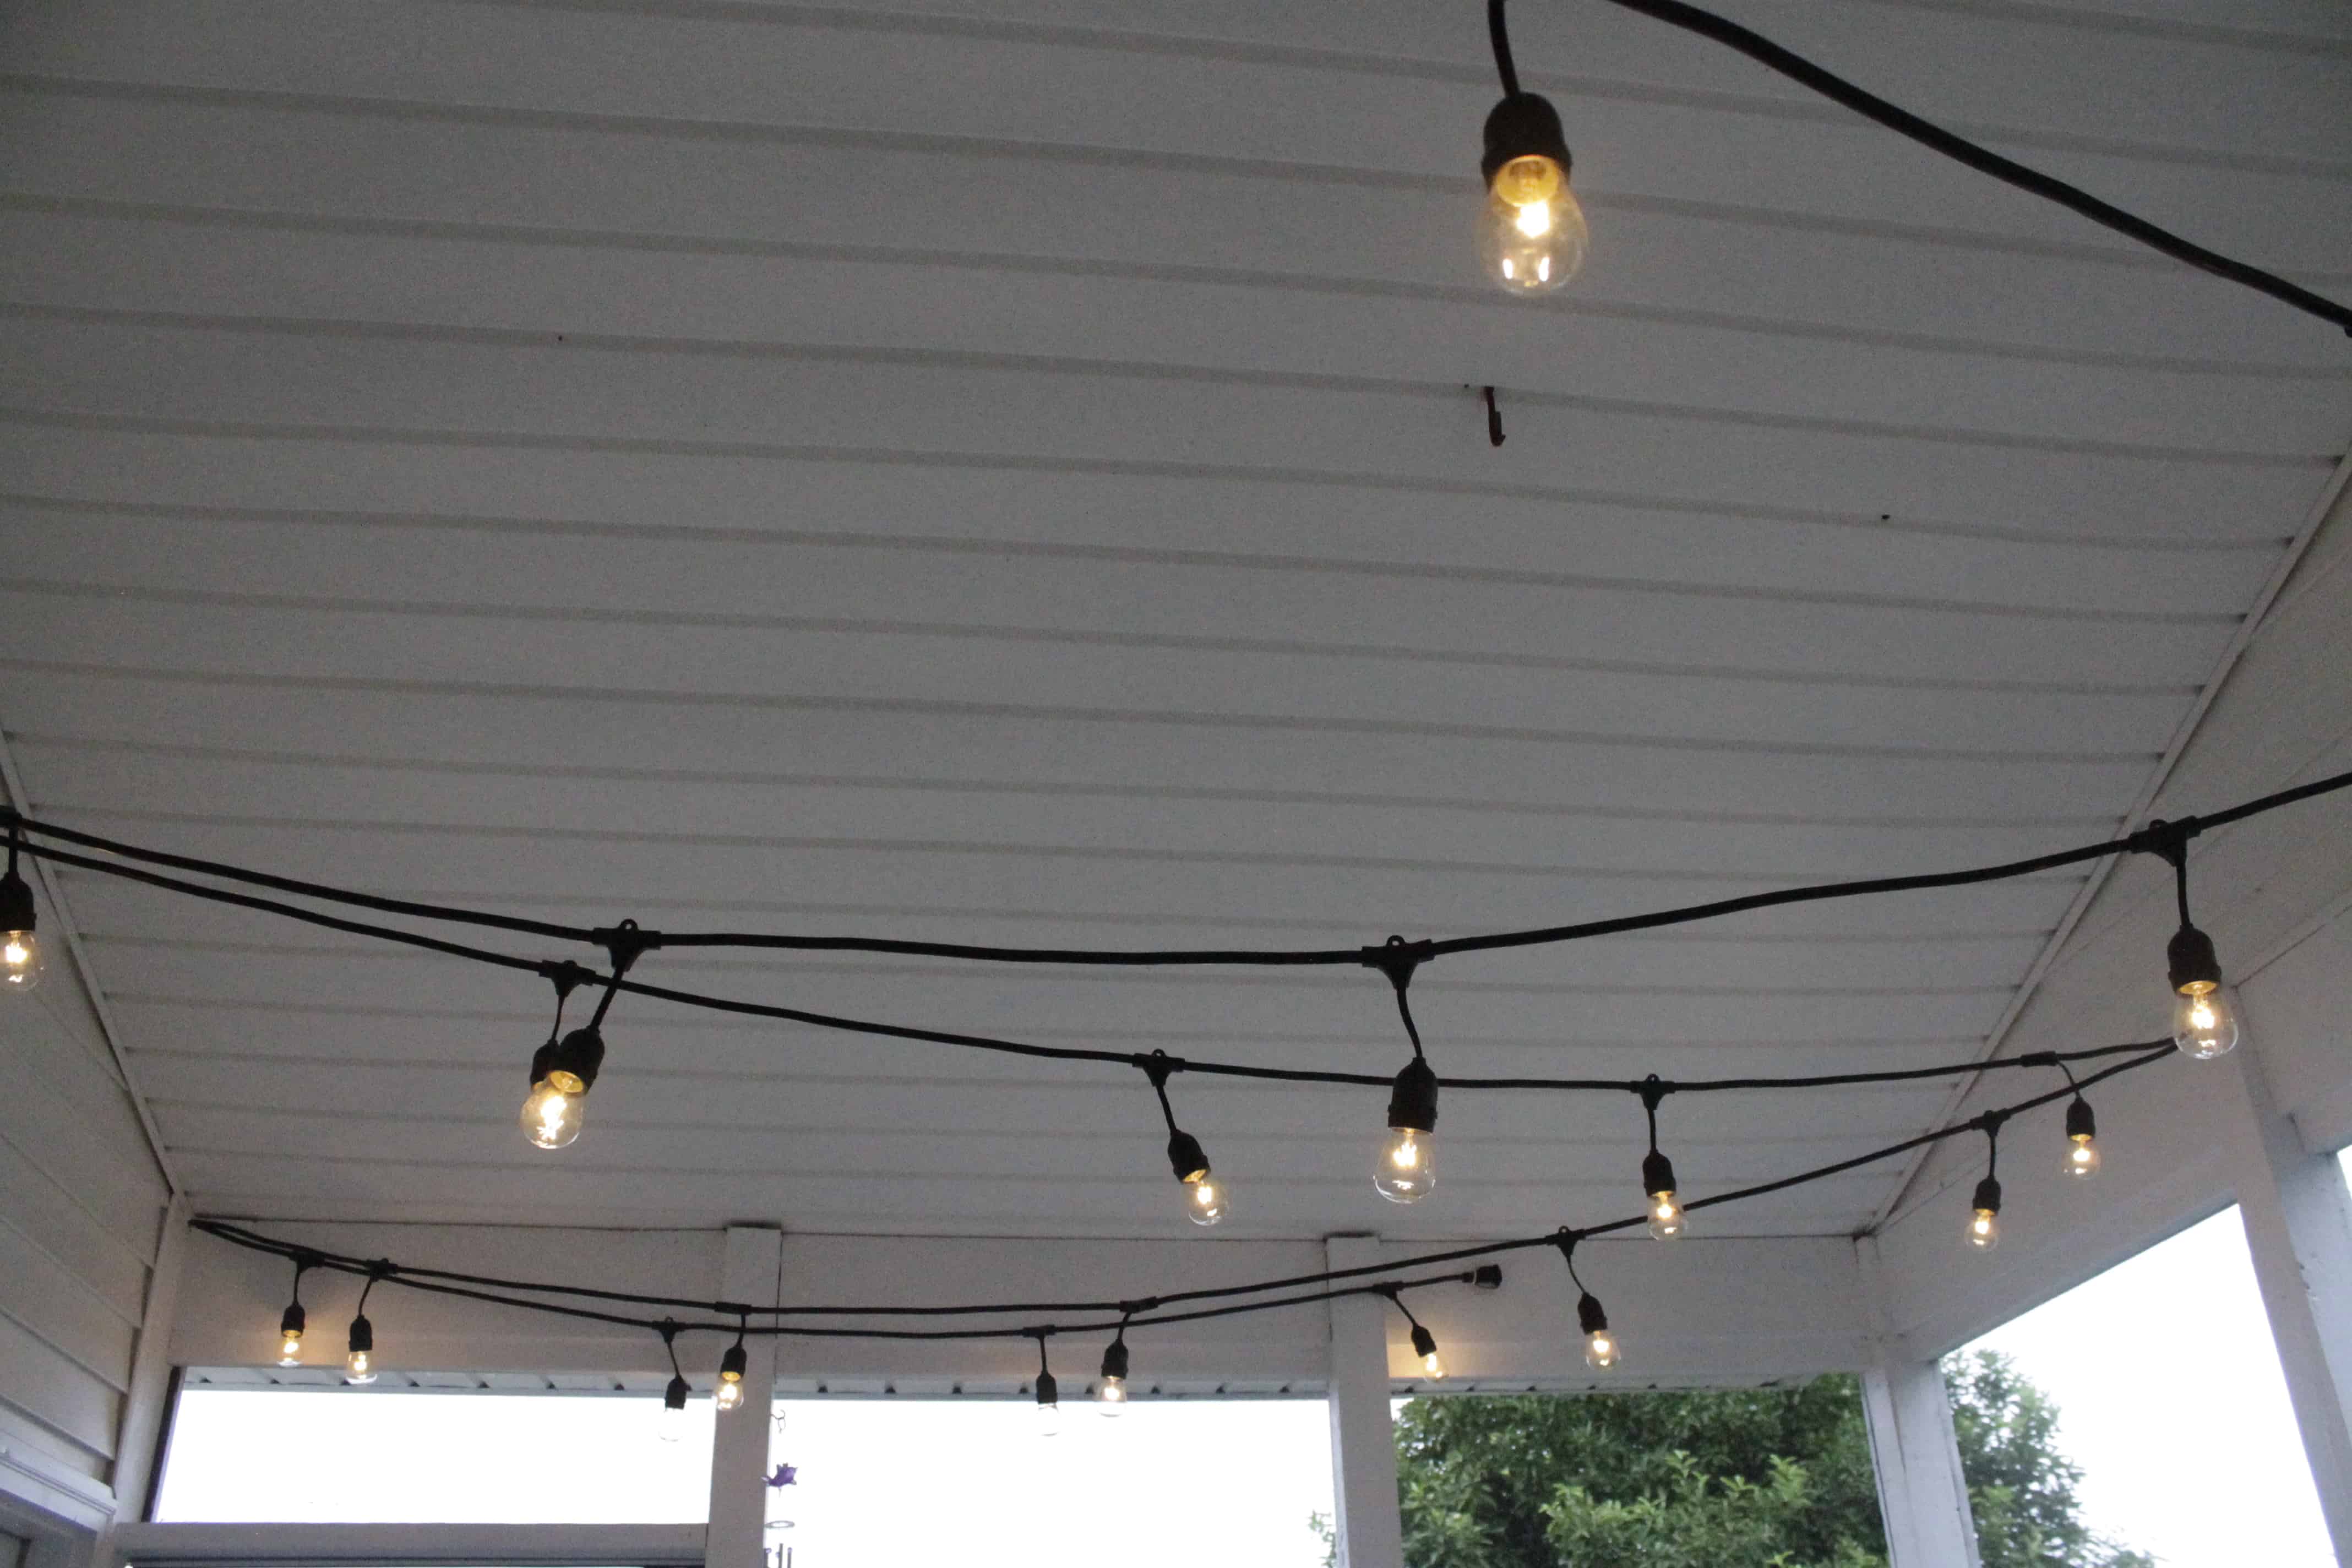 To Hang String Lights On Ered Porch